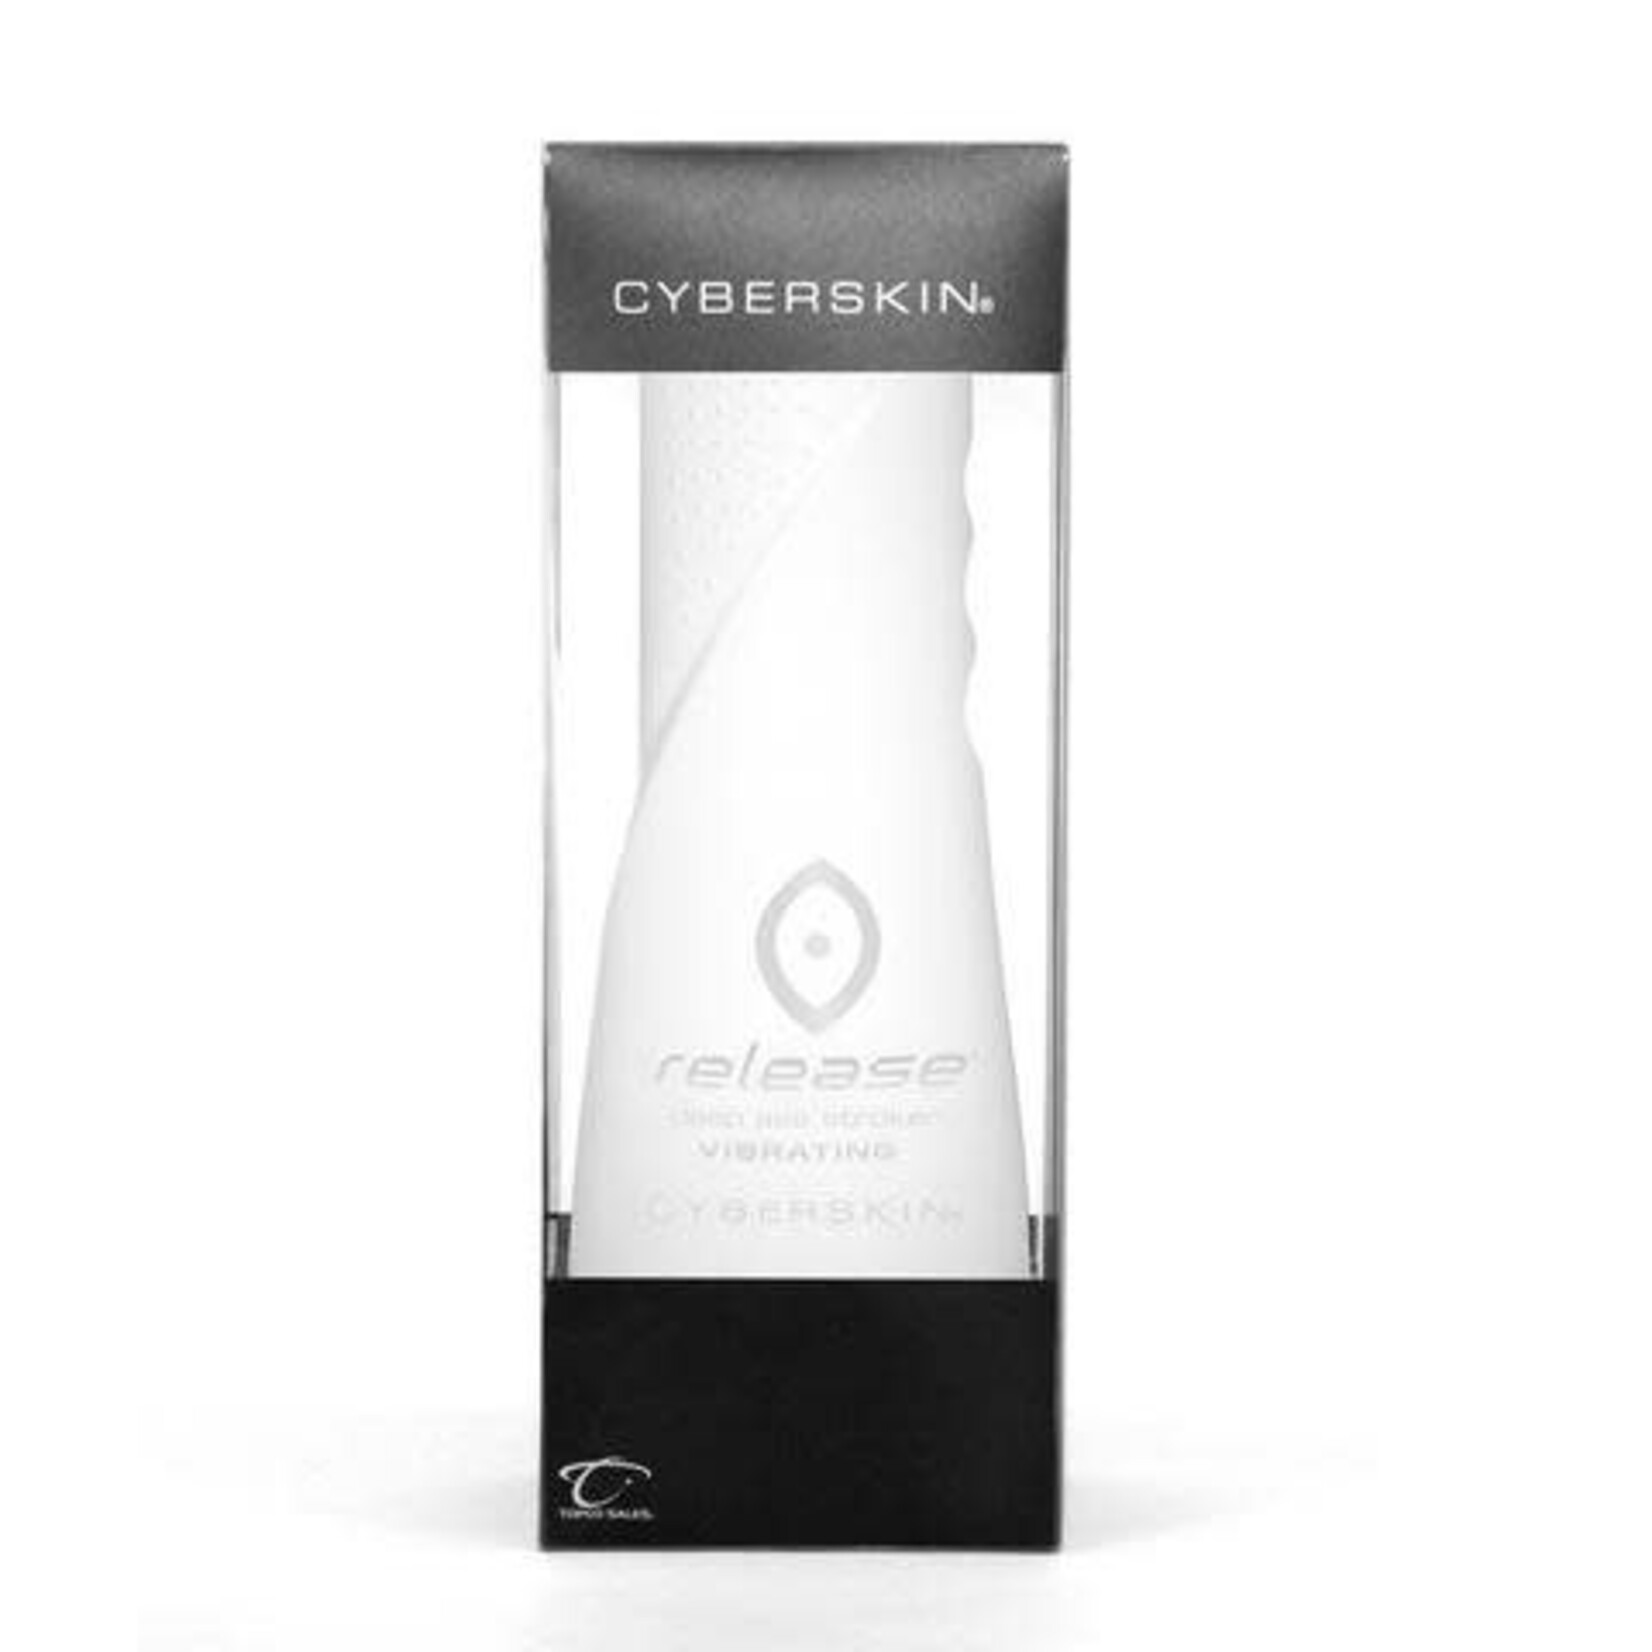 Topco Sales Release Vibrating CyberSkin Stroker - Tight Ass